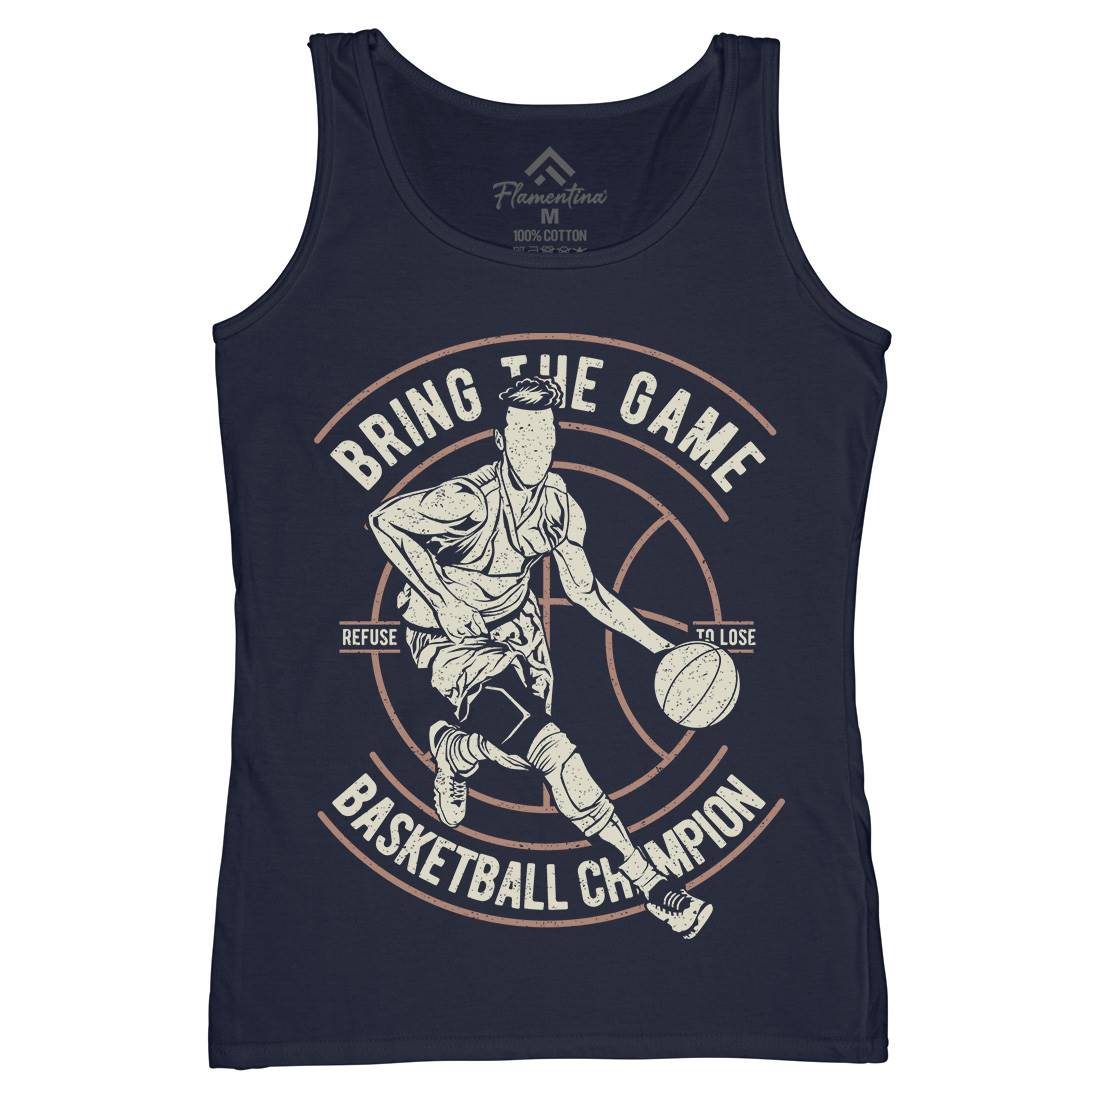 Bring The Game Womens Organic Tank Top Vest Sport A627